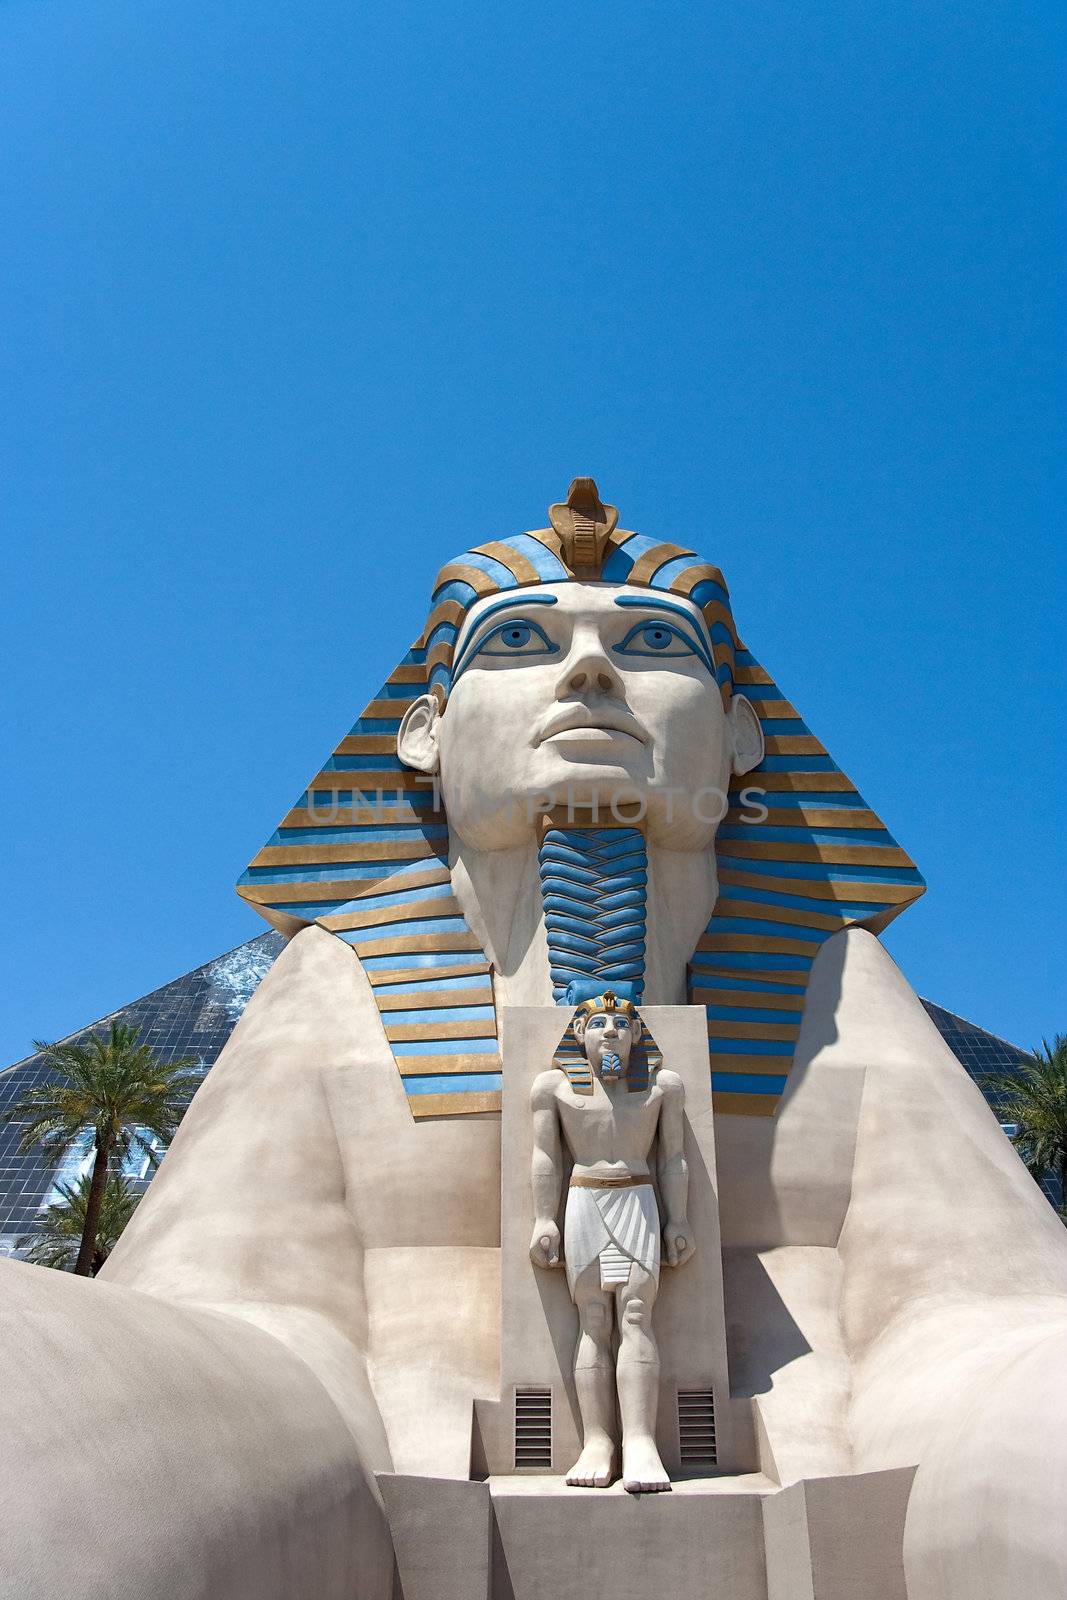 May 25th, 2009 - Las Vegas, Nevada, USA - The Sphinx entrance to the Luxor Hotel and Casino on Las Vegas Boulevard